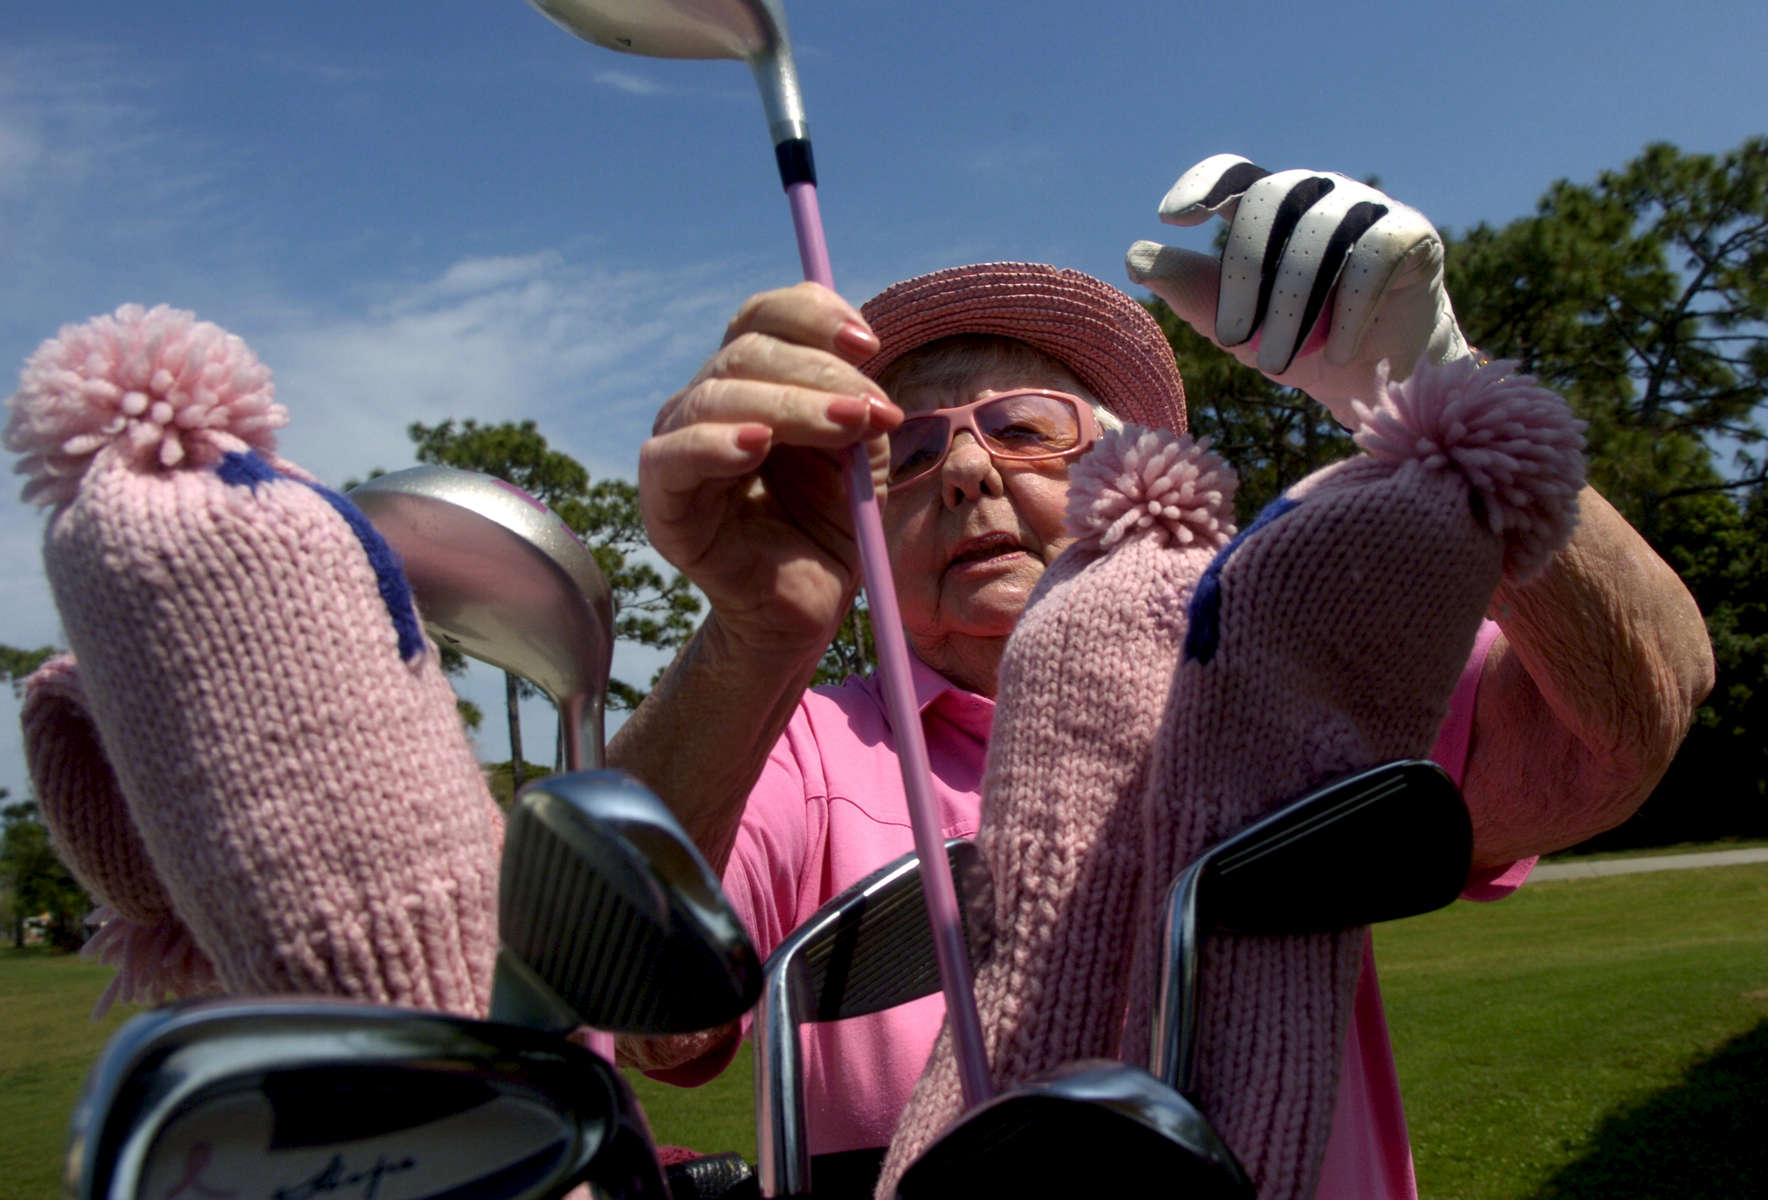 Ruth Wagner of Port Charlotte pulls a pink-shafted golf club from her bag at the Venice East Golf Club Wednesday afternoon, March 5, 2008. Wagner lives in a pink home and estimates that about 80% of her wardrobe is pink now that she's retired. {quote}I wore so much dark colors in business - brown, black... they didn't like pink.{quote} She hits the links twice a week and also enjoys mahjong and bridge. {quote}I'm not a sit at home type. I don't want to watch the box,{quote} she said. 